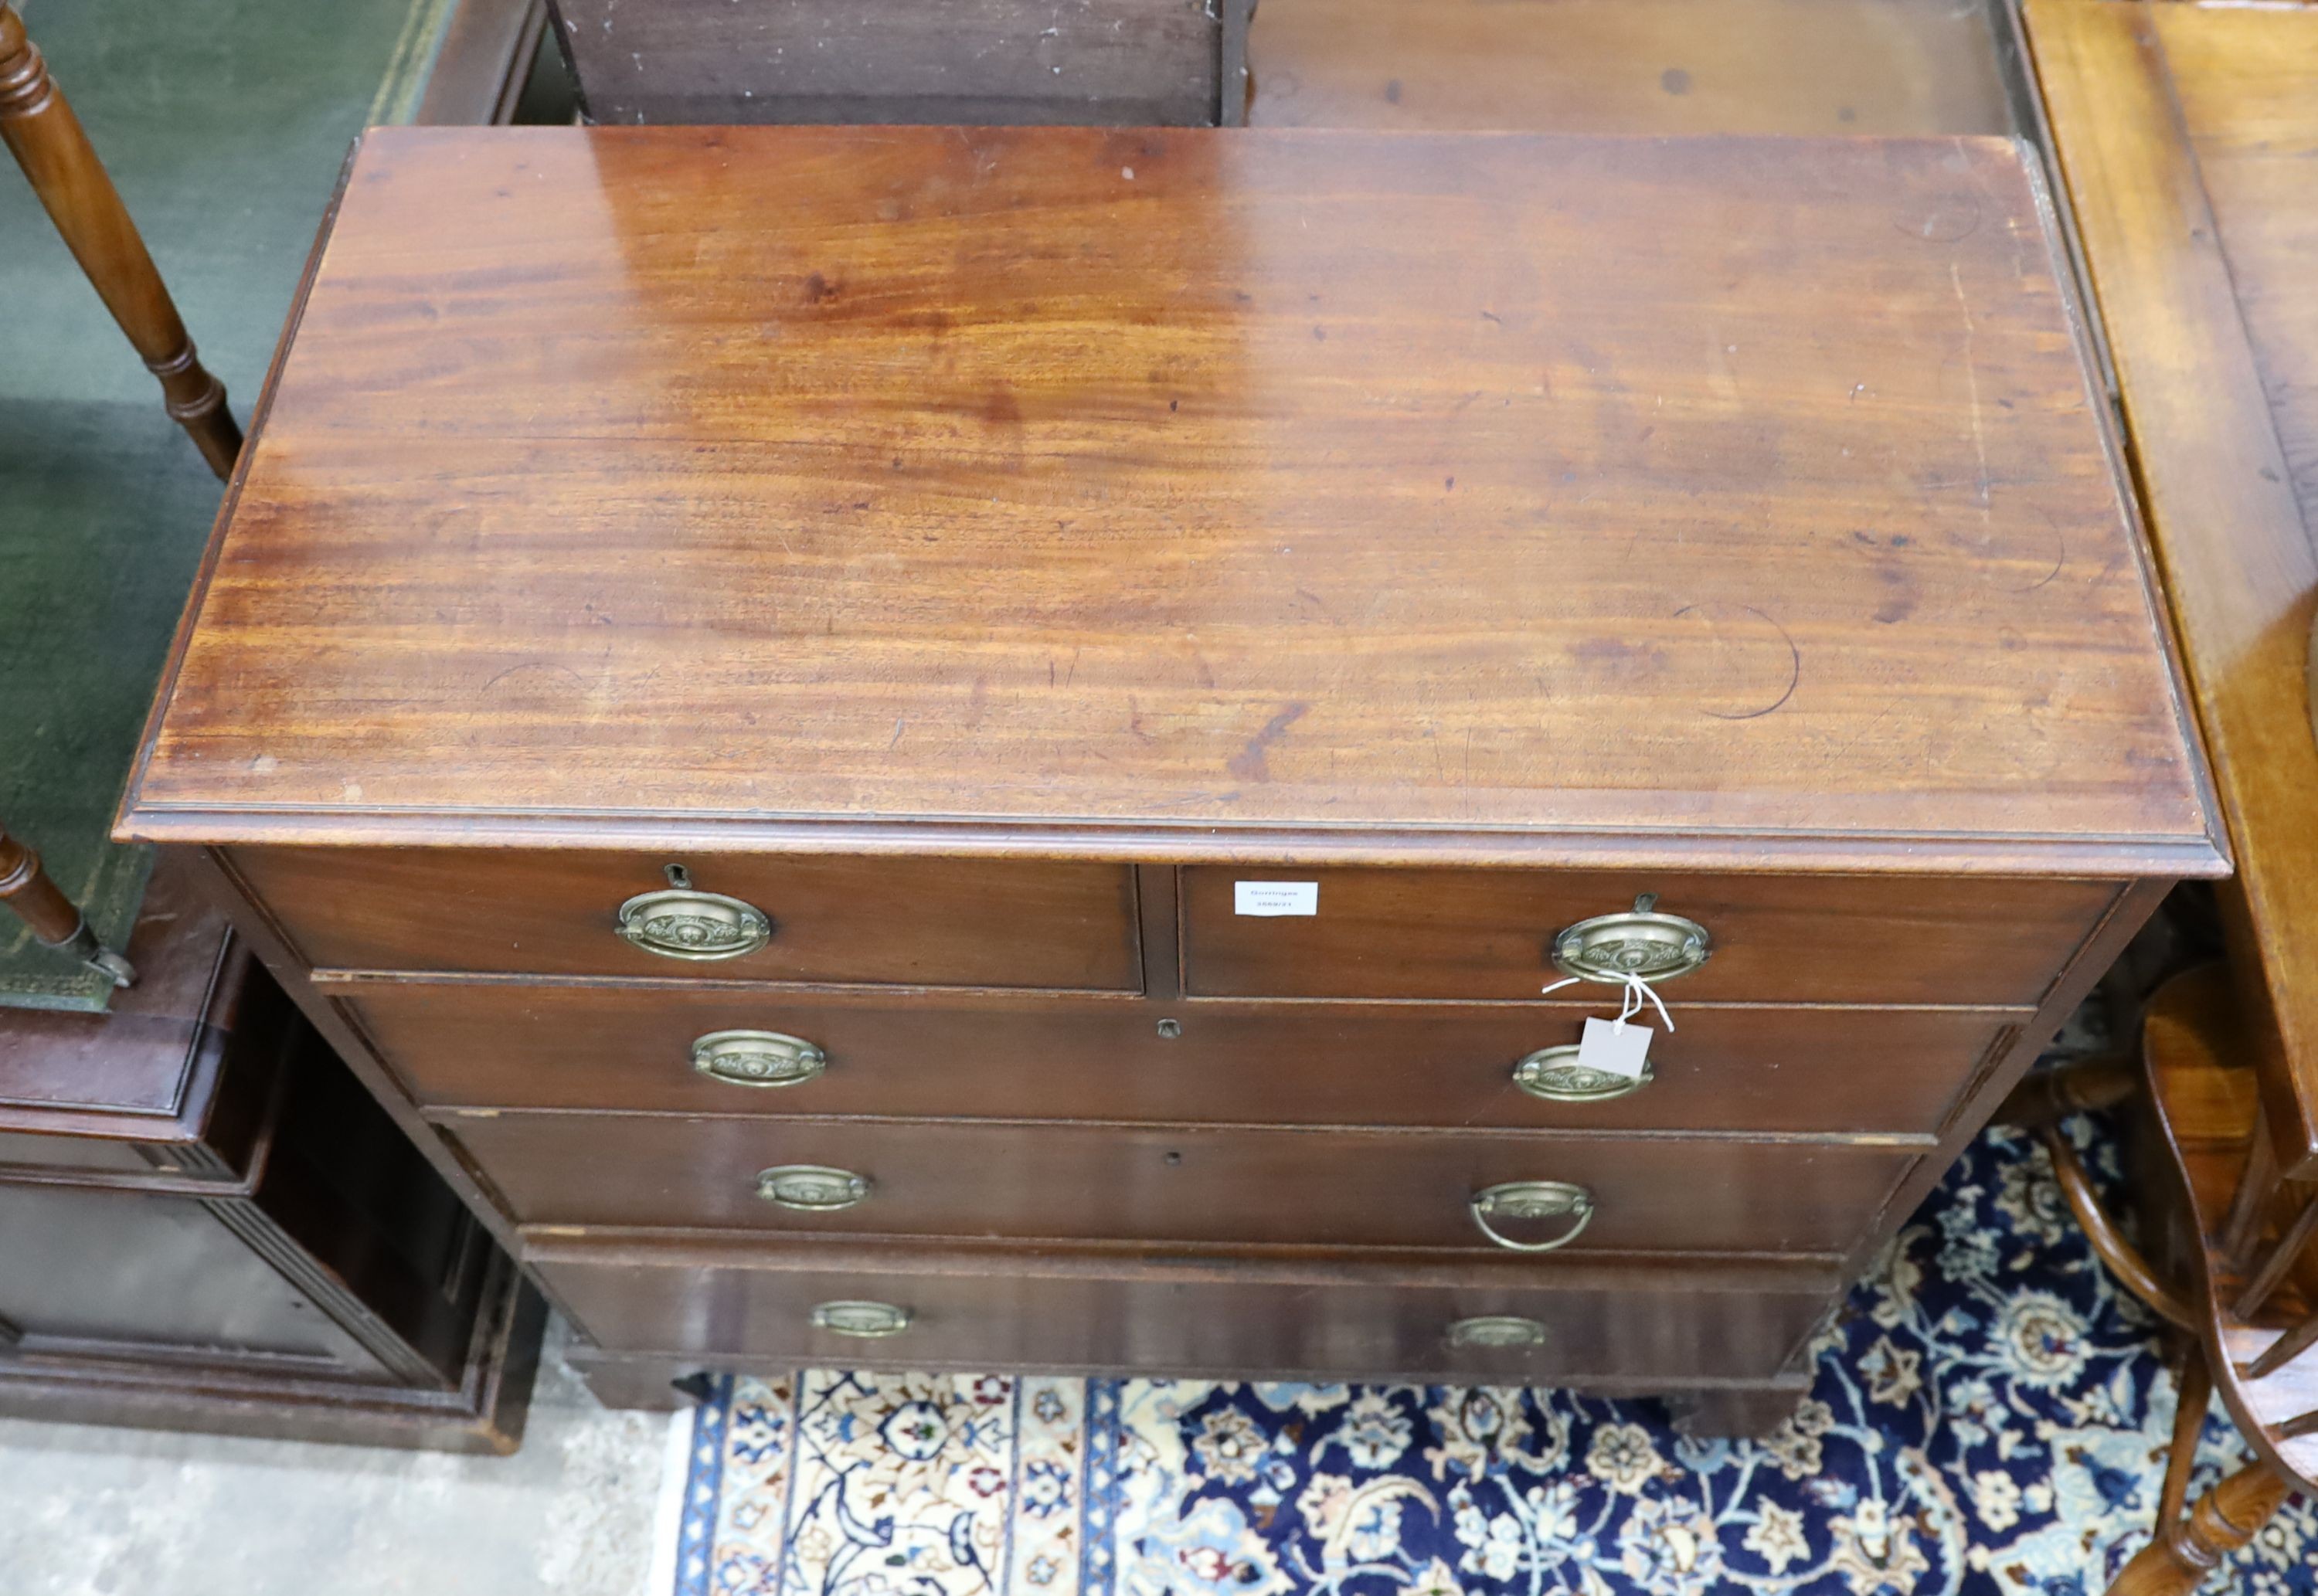 A George III mahogany straight front chest, fitted three long drawers and two short drawers, width 102cm, depth 49cm, height 102cm